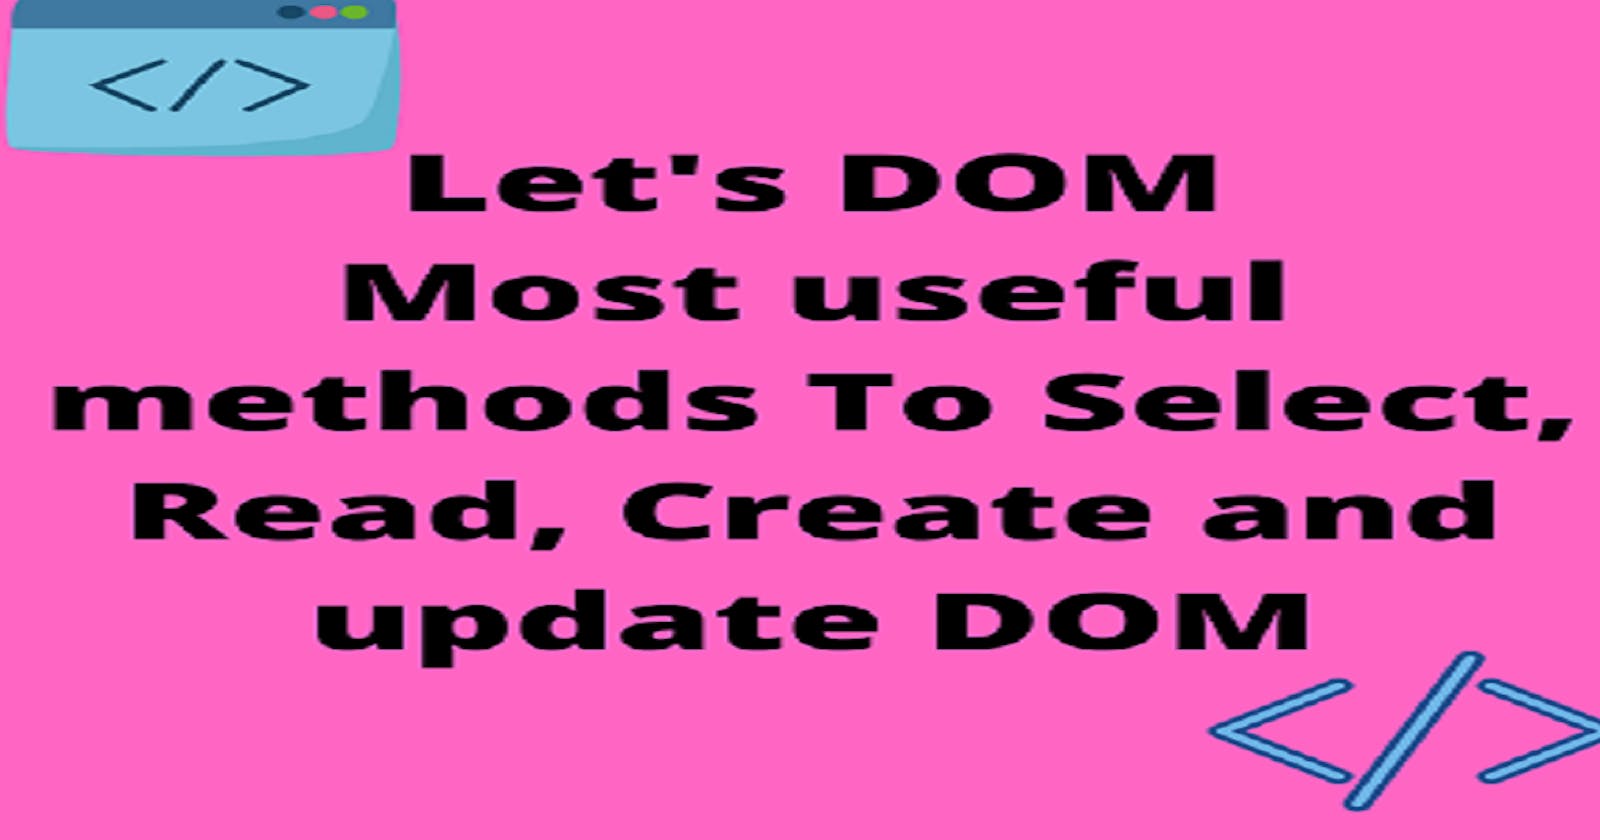 Let's DOM: Select, read, create and update